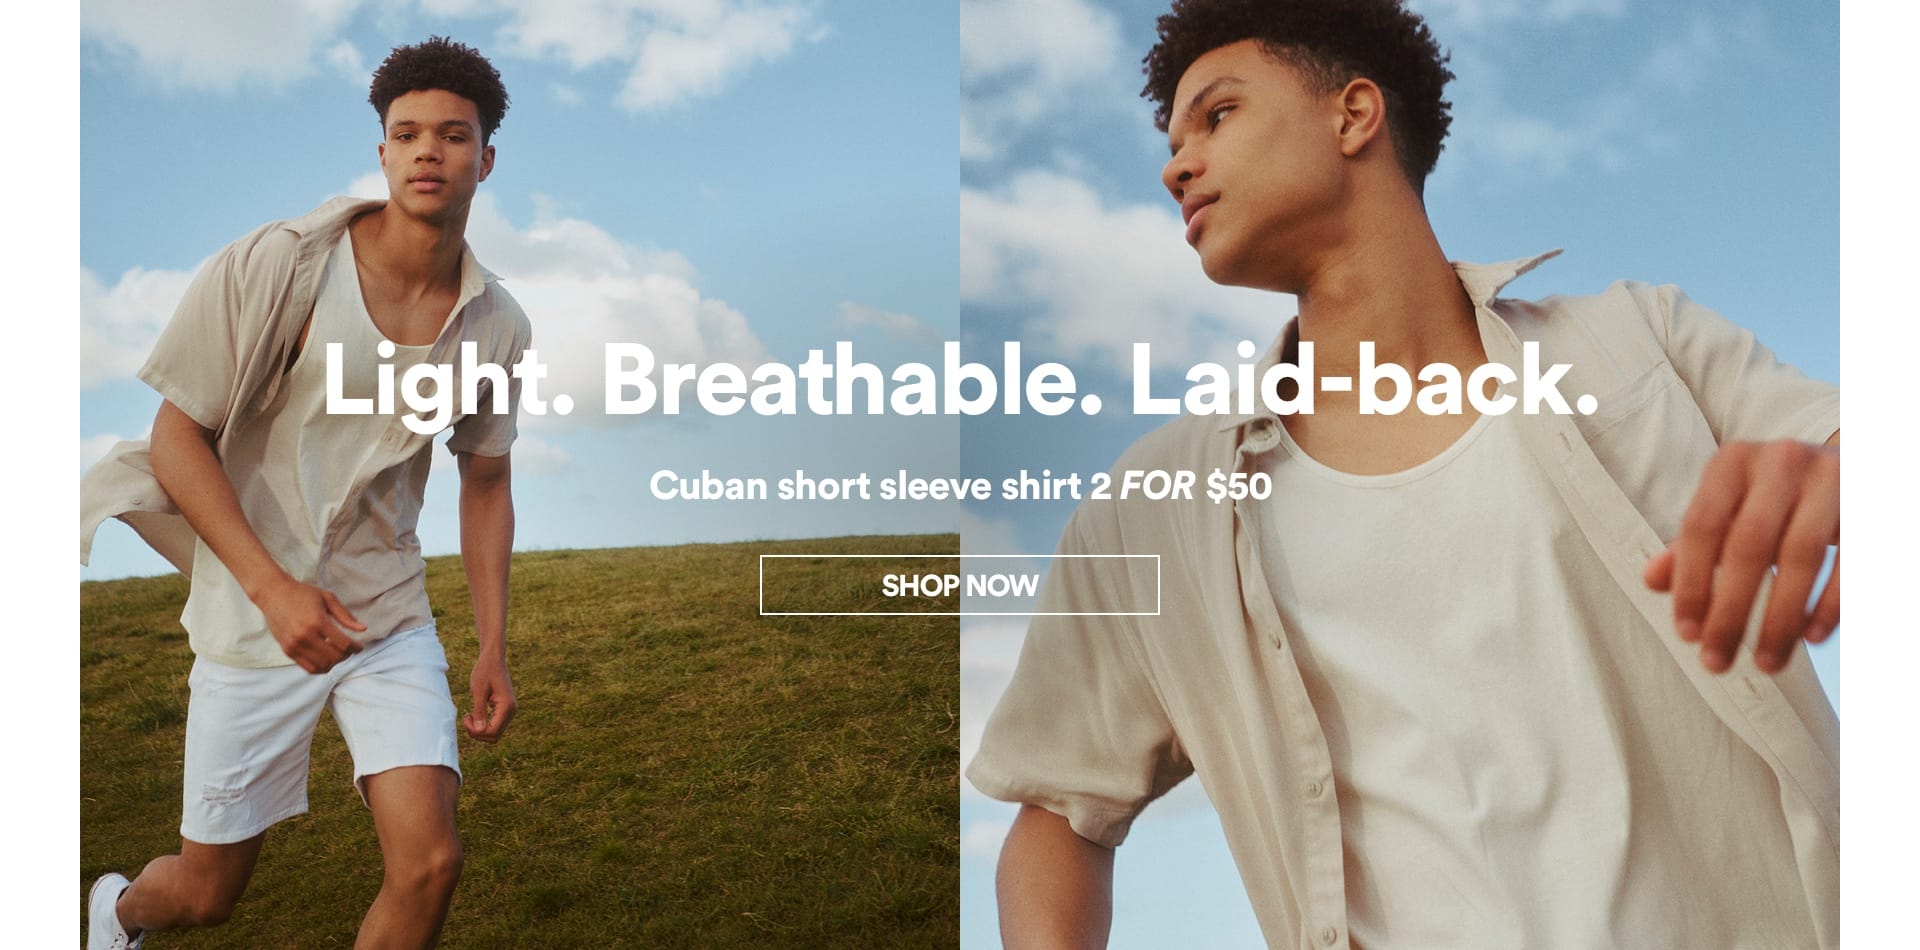 Light. Breathable. Laid-back. | Cuban short sleeve shirt 2 FOR $50 | Click to Shop Now